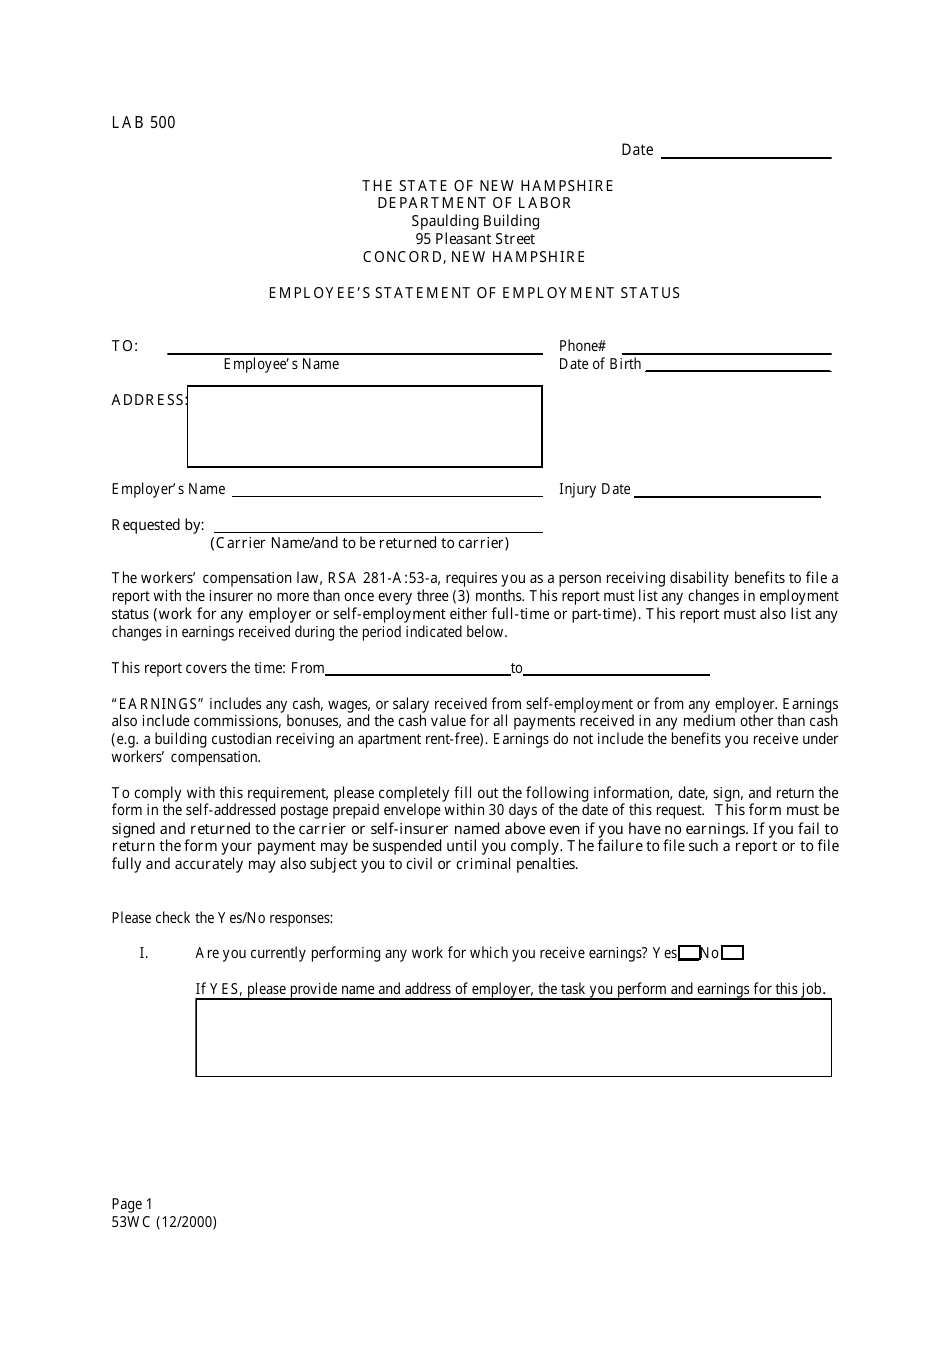 Form 53WC Employees Statement of Employment Status - New Hampshire, Page 1